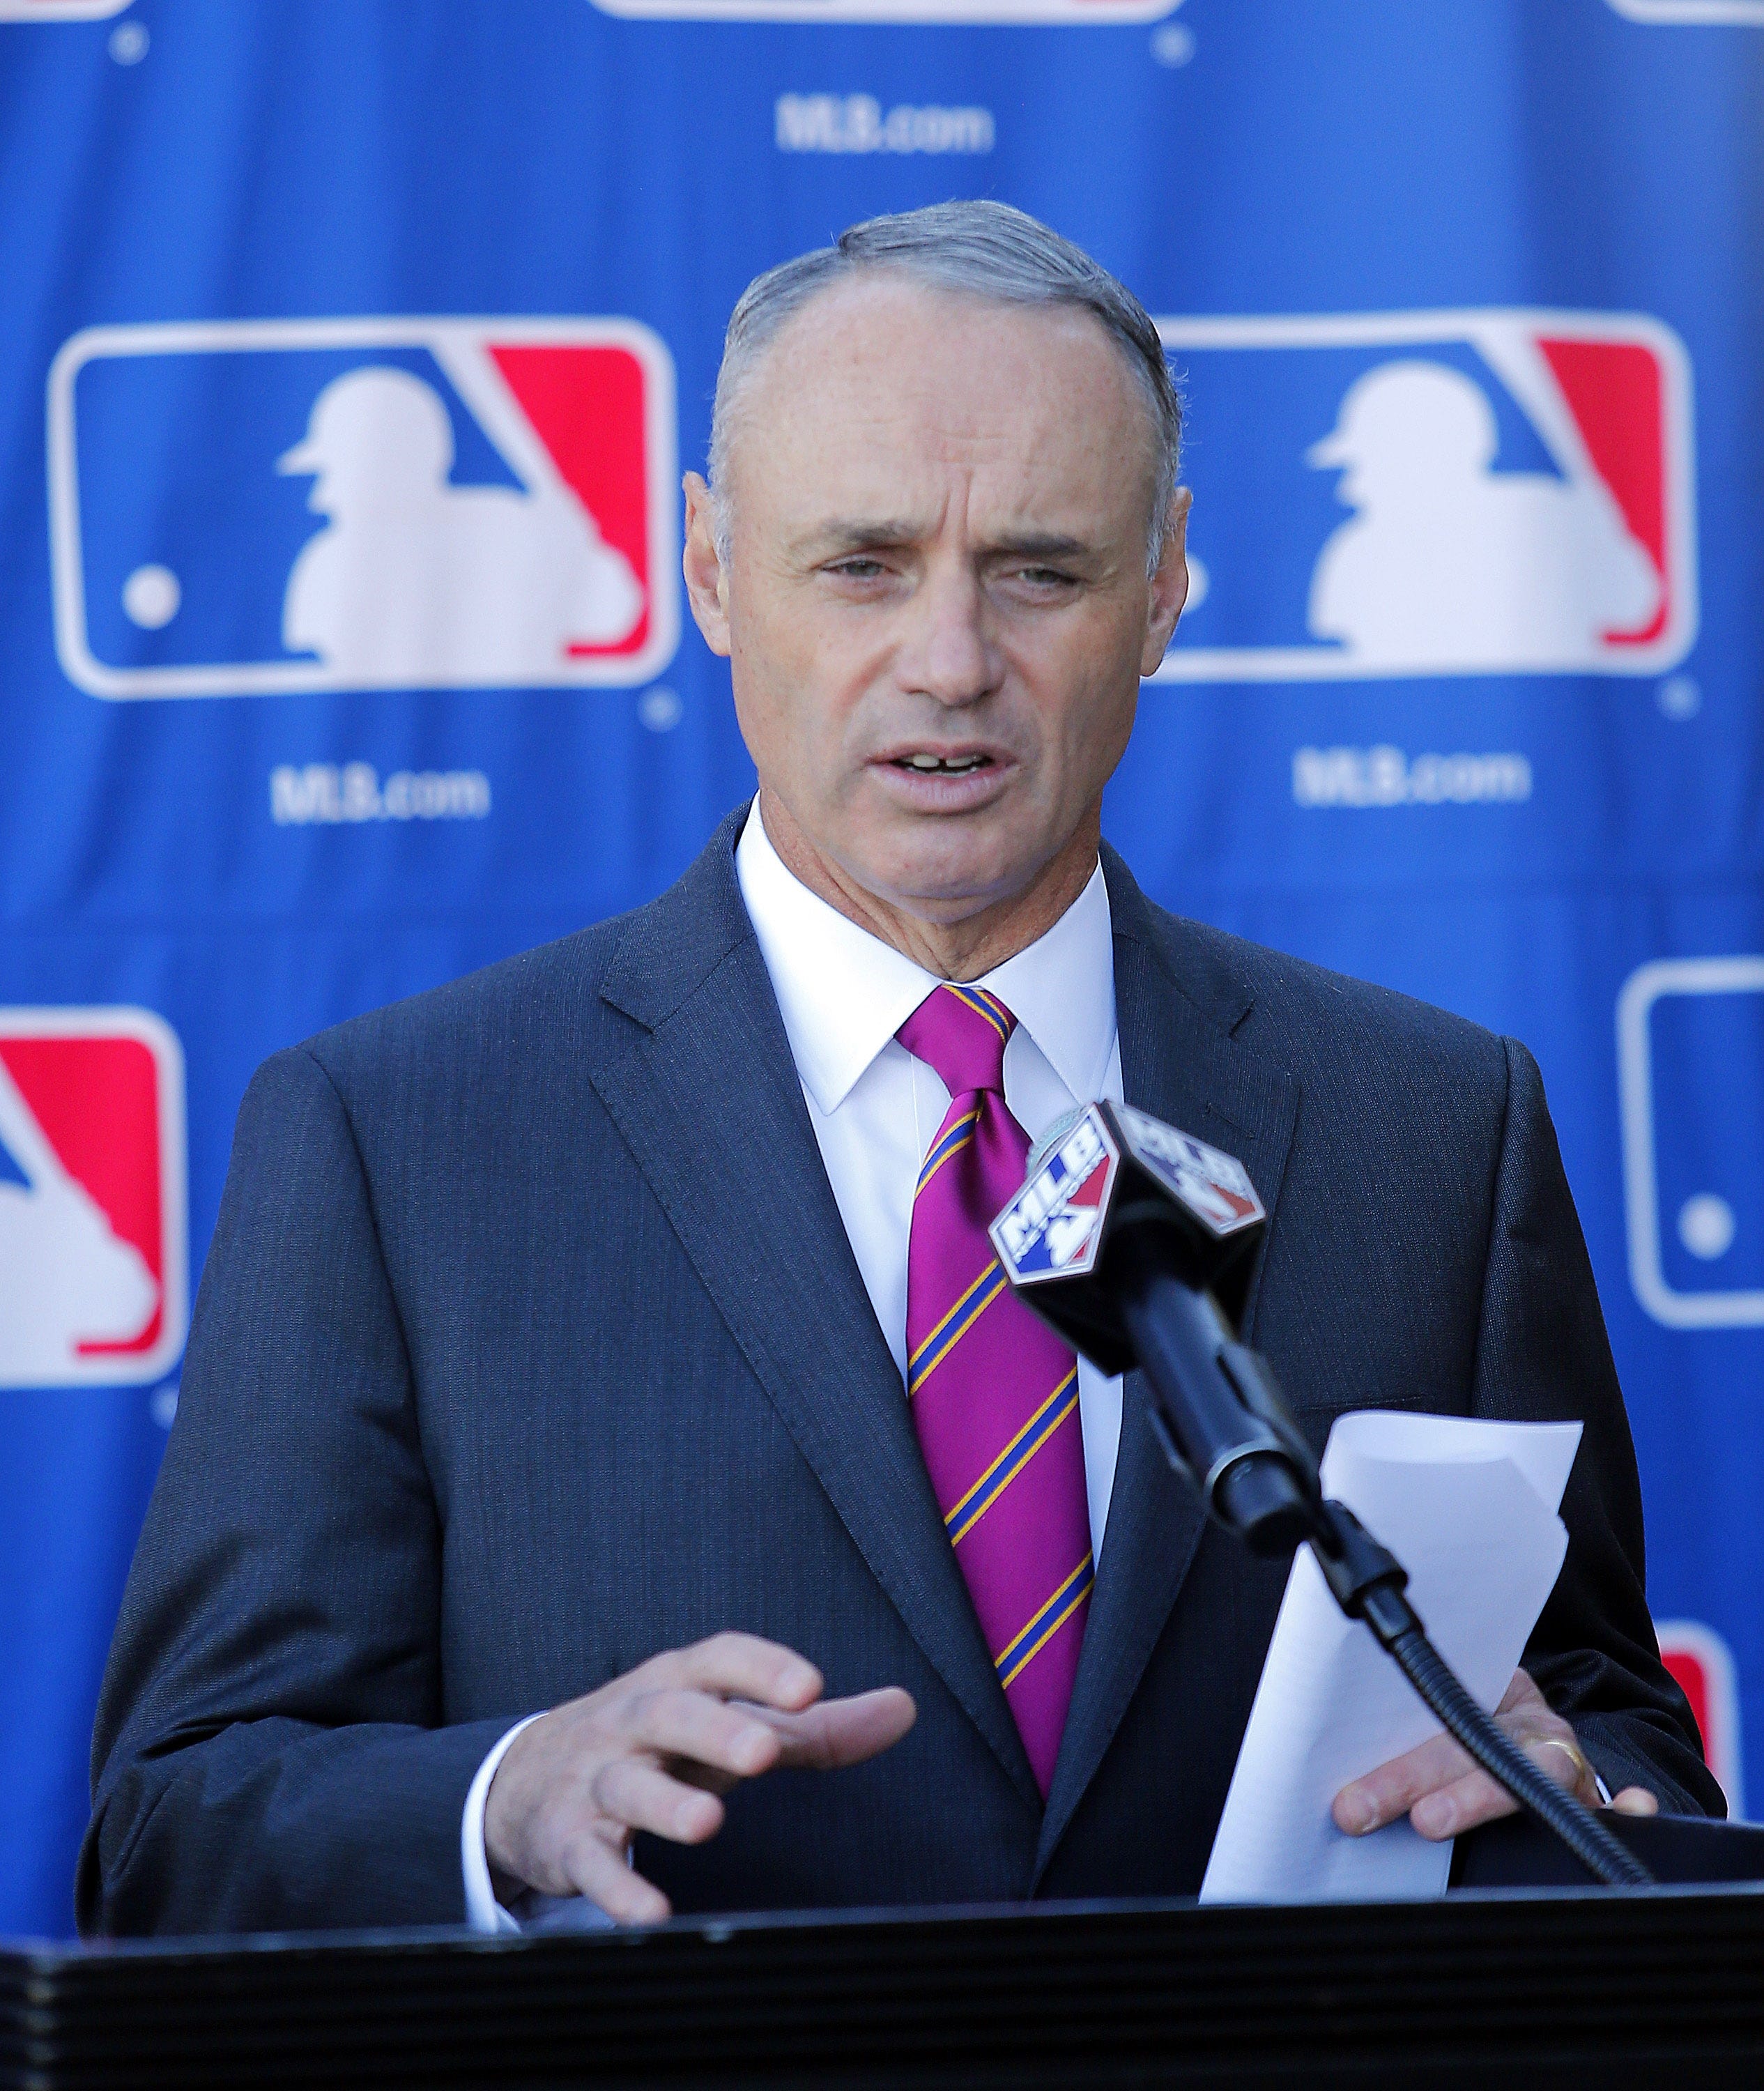 MLB commissioner Rob Manfred has expansion plans for Major League